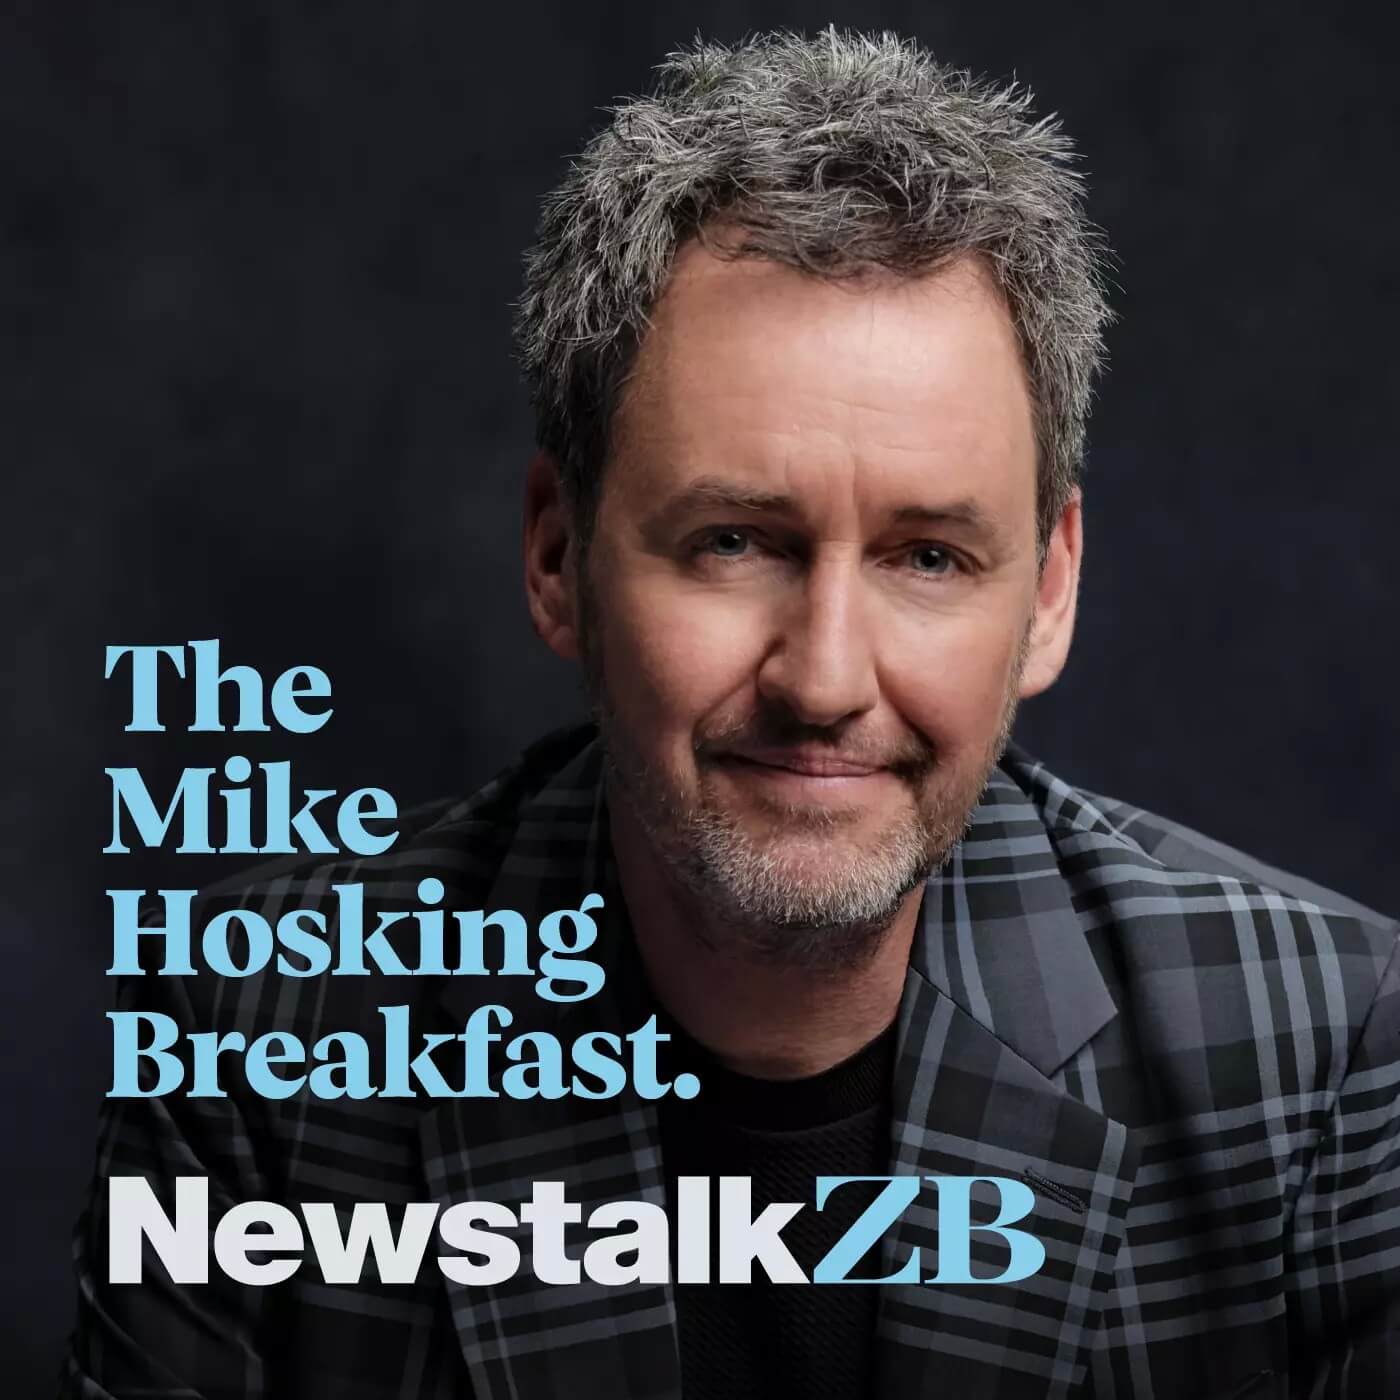 Radio interview with Mike Hosking